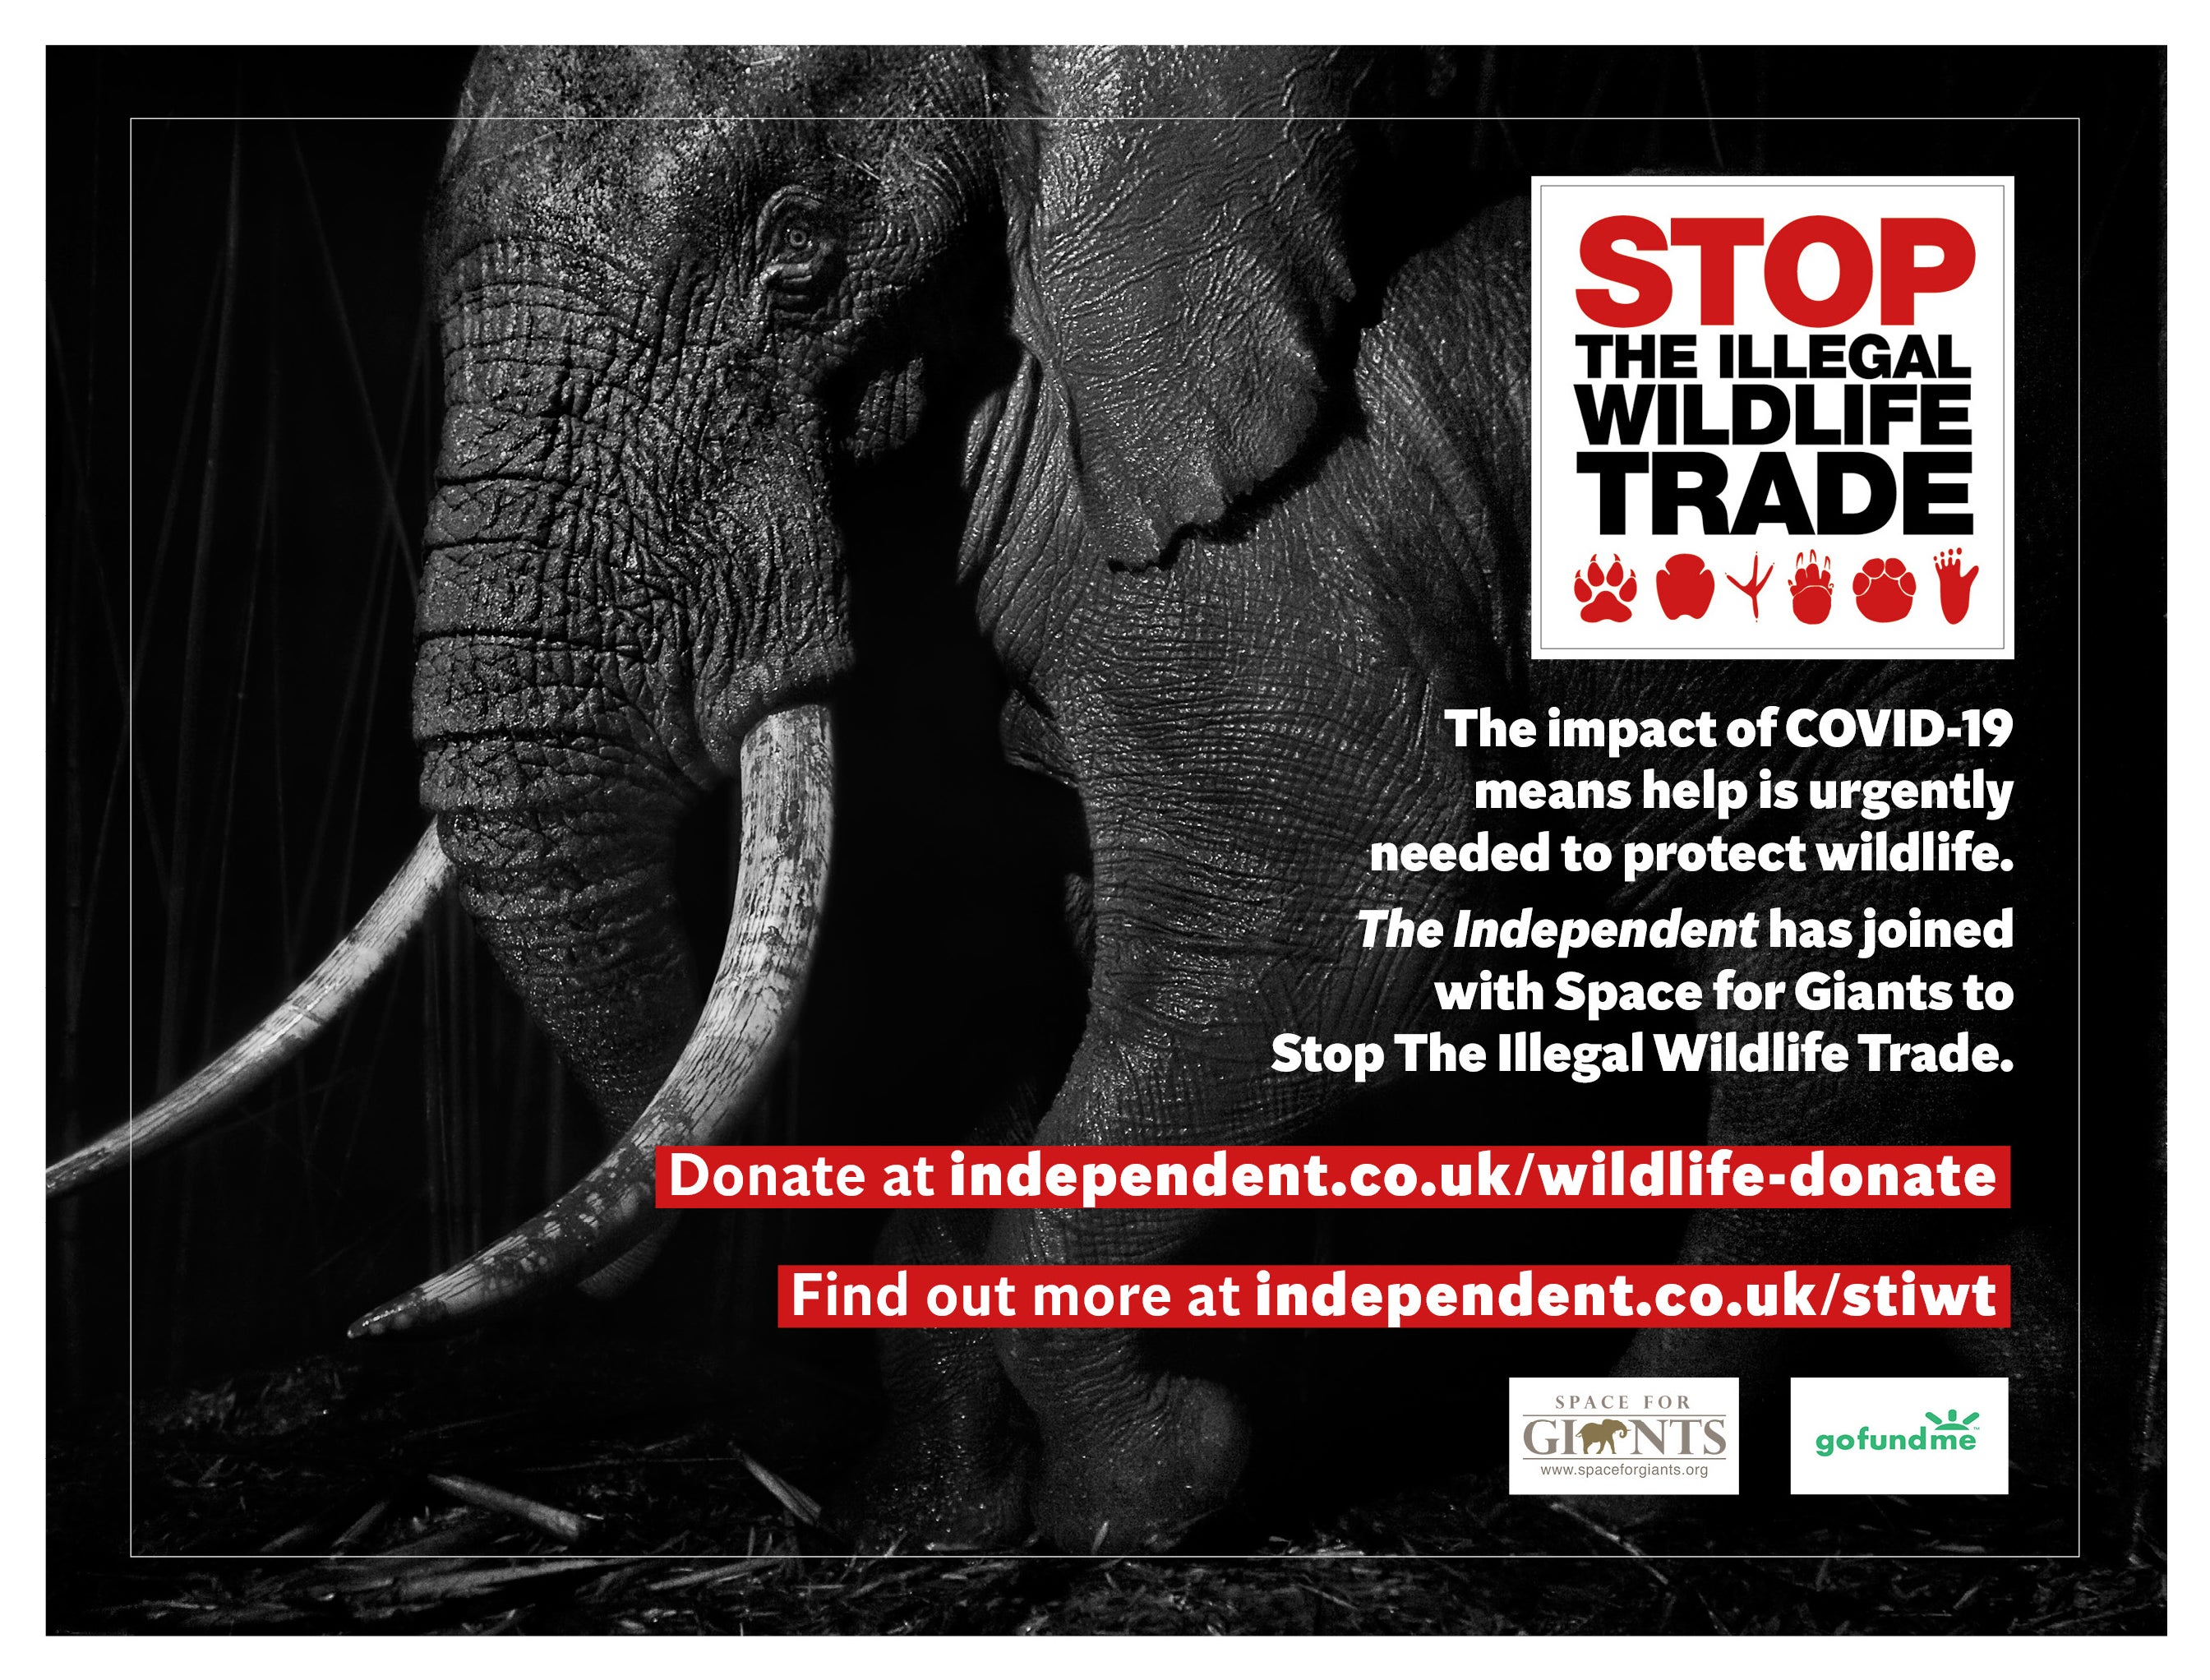 We are working with conservation charity Space for Giants to protect wildlife at risk from poachers due to the conservation funding crisis caused by Covid-19. Help is desperately needed to support wildlife rangers, local communities and law enforcement personnel to prevent wildlife crime